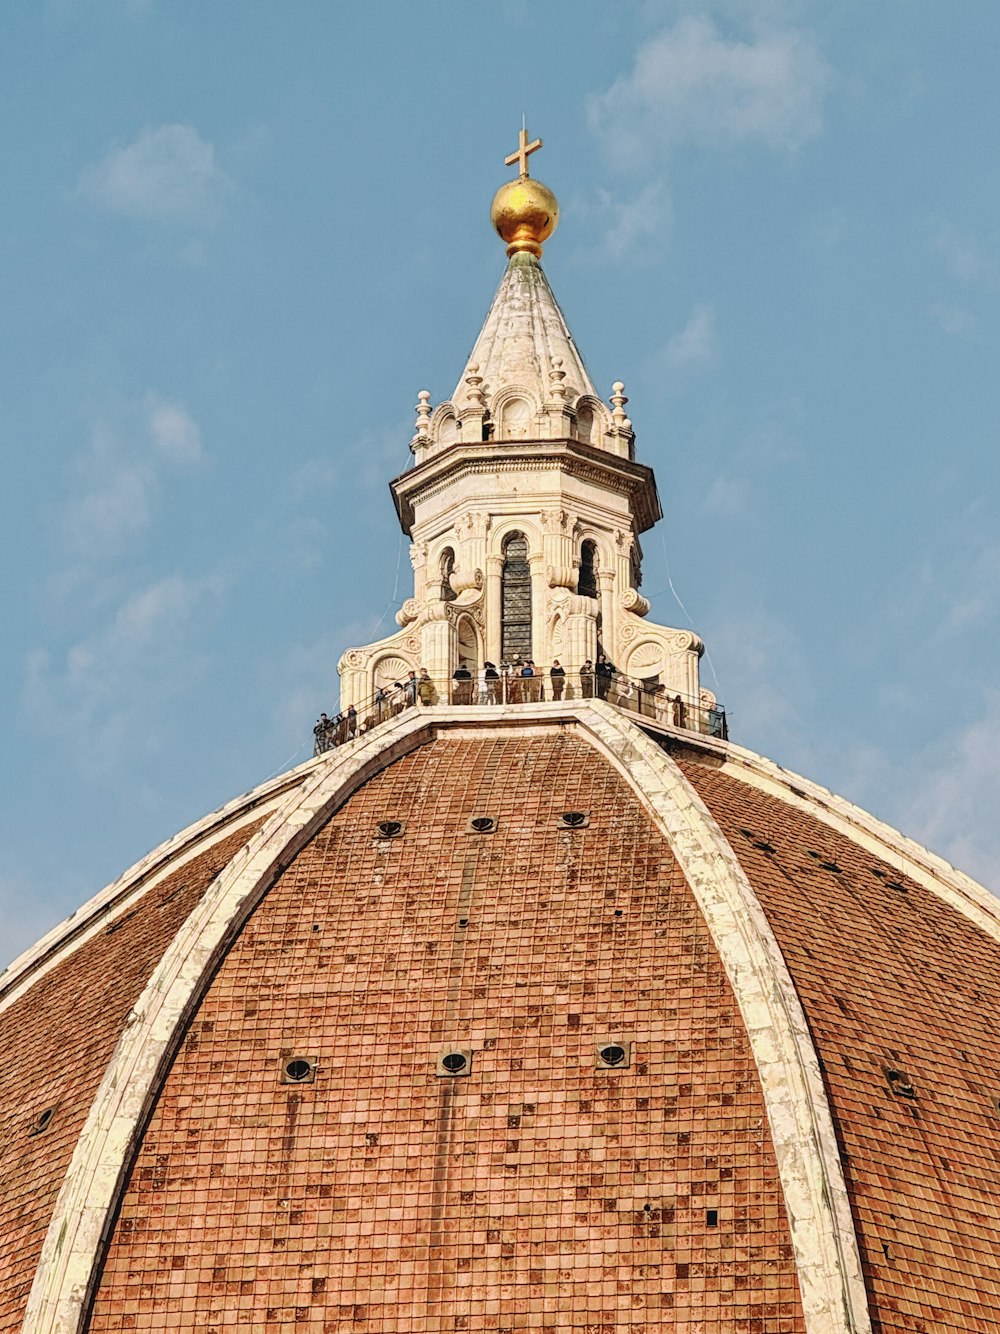 the top of a brick building with a golden dome